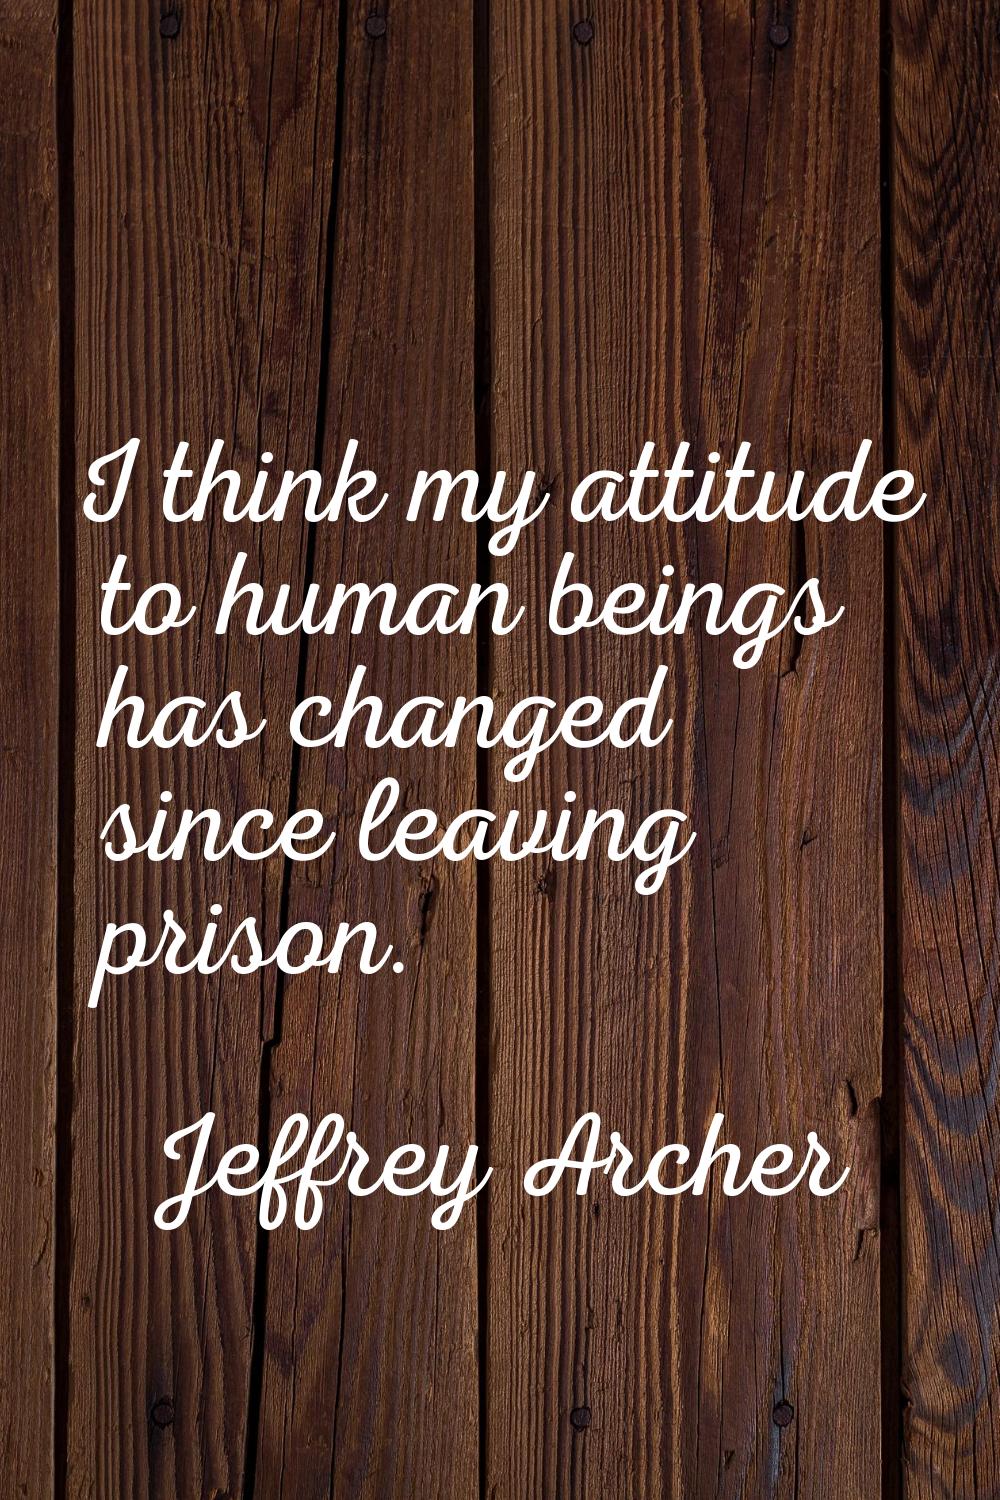 I think my attitude to human beings has changed since leaving prison.